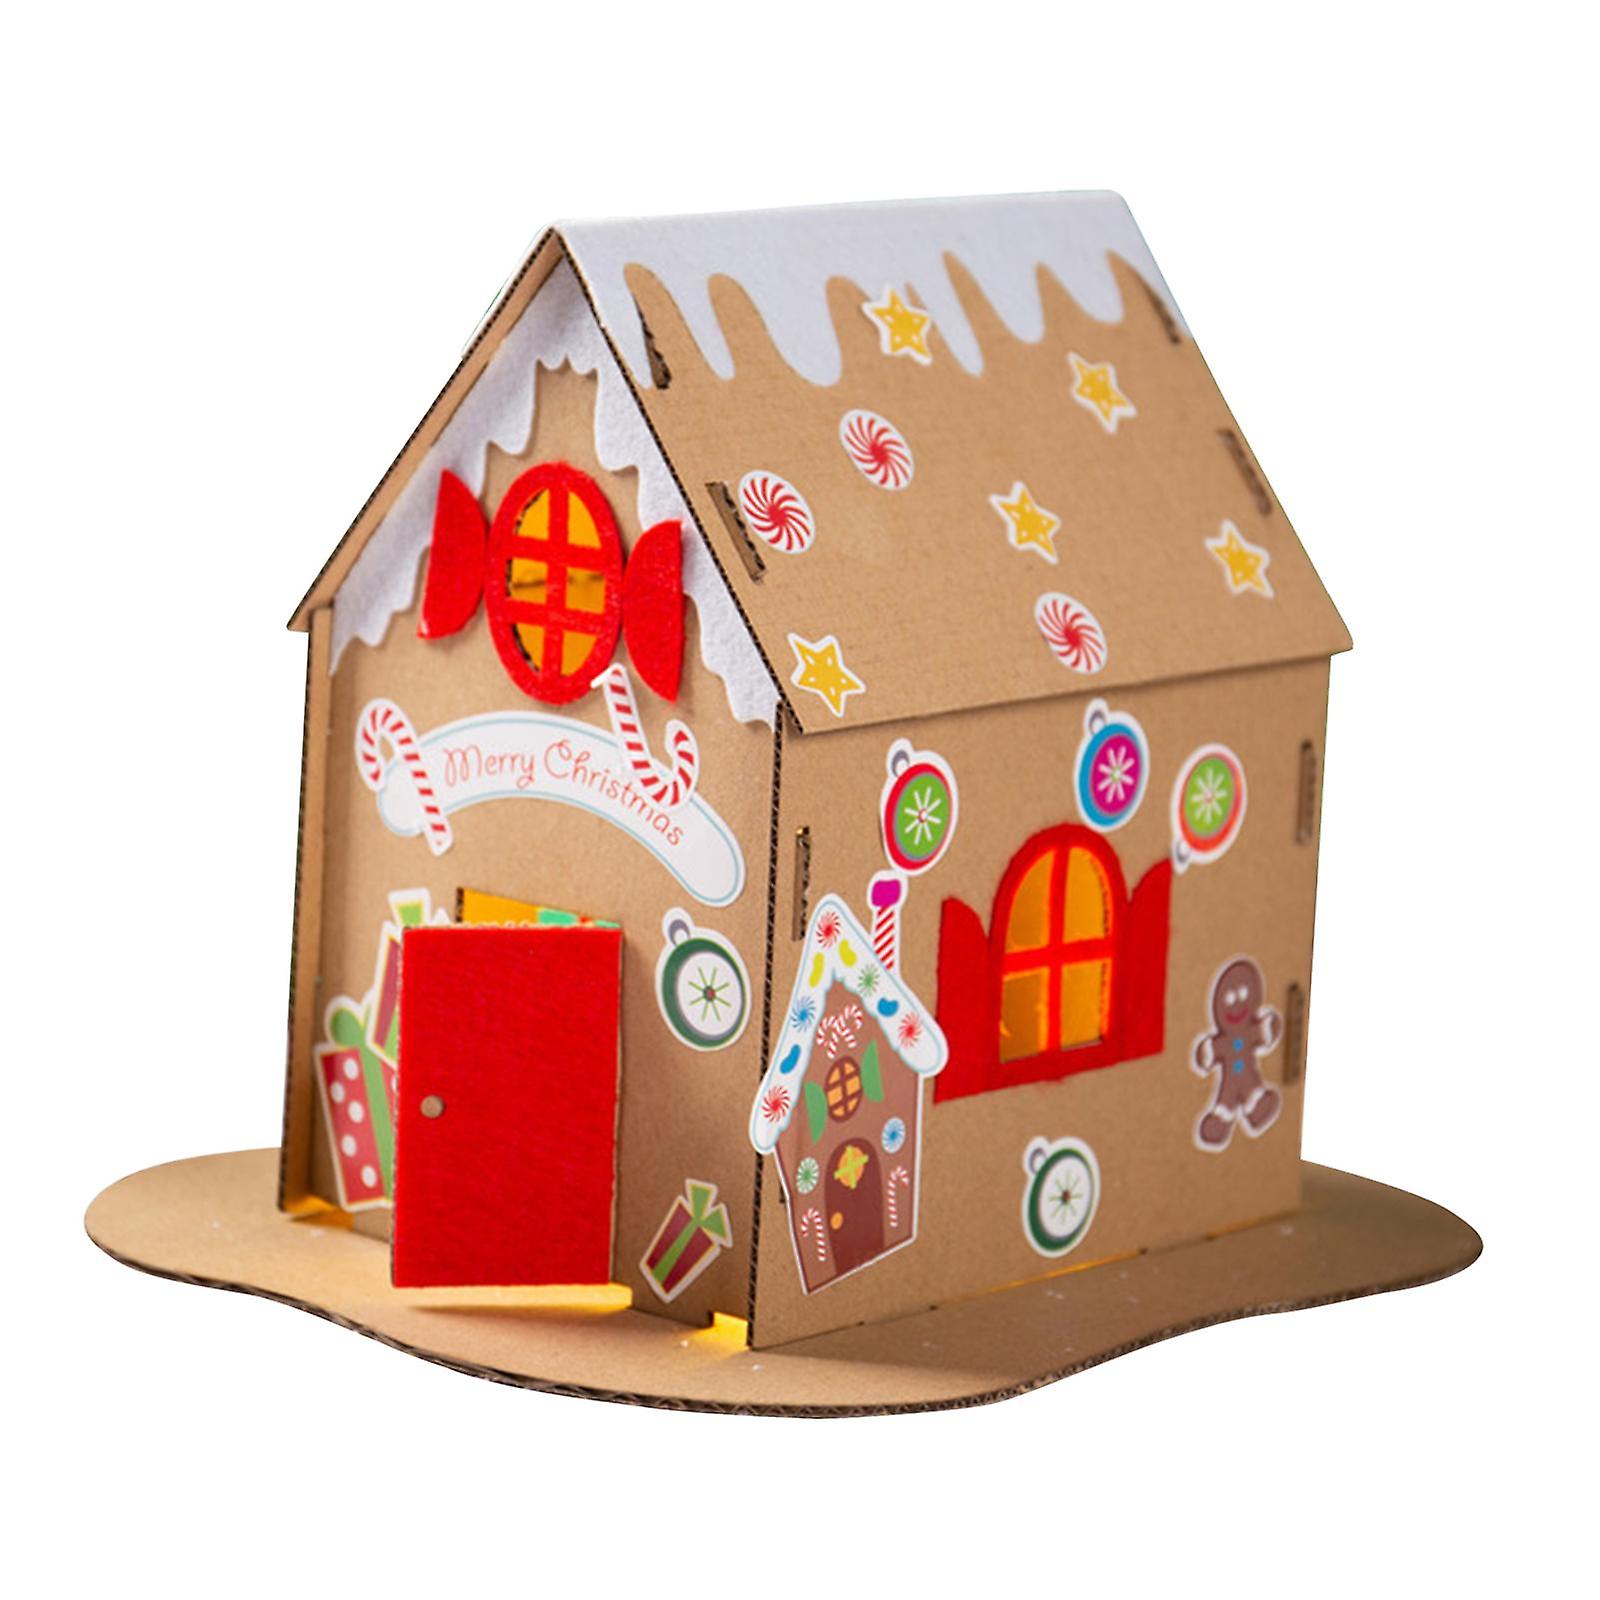 Christmas Cardboard House Kits Unassembly Cardboard House For Children Kids Style C